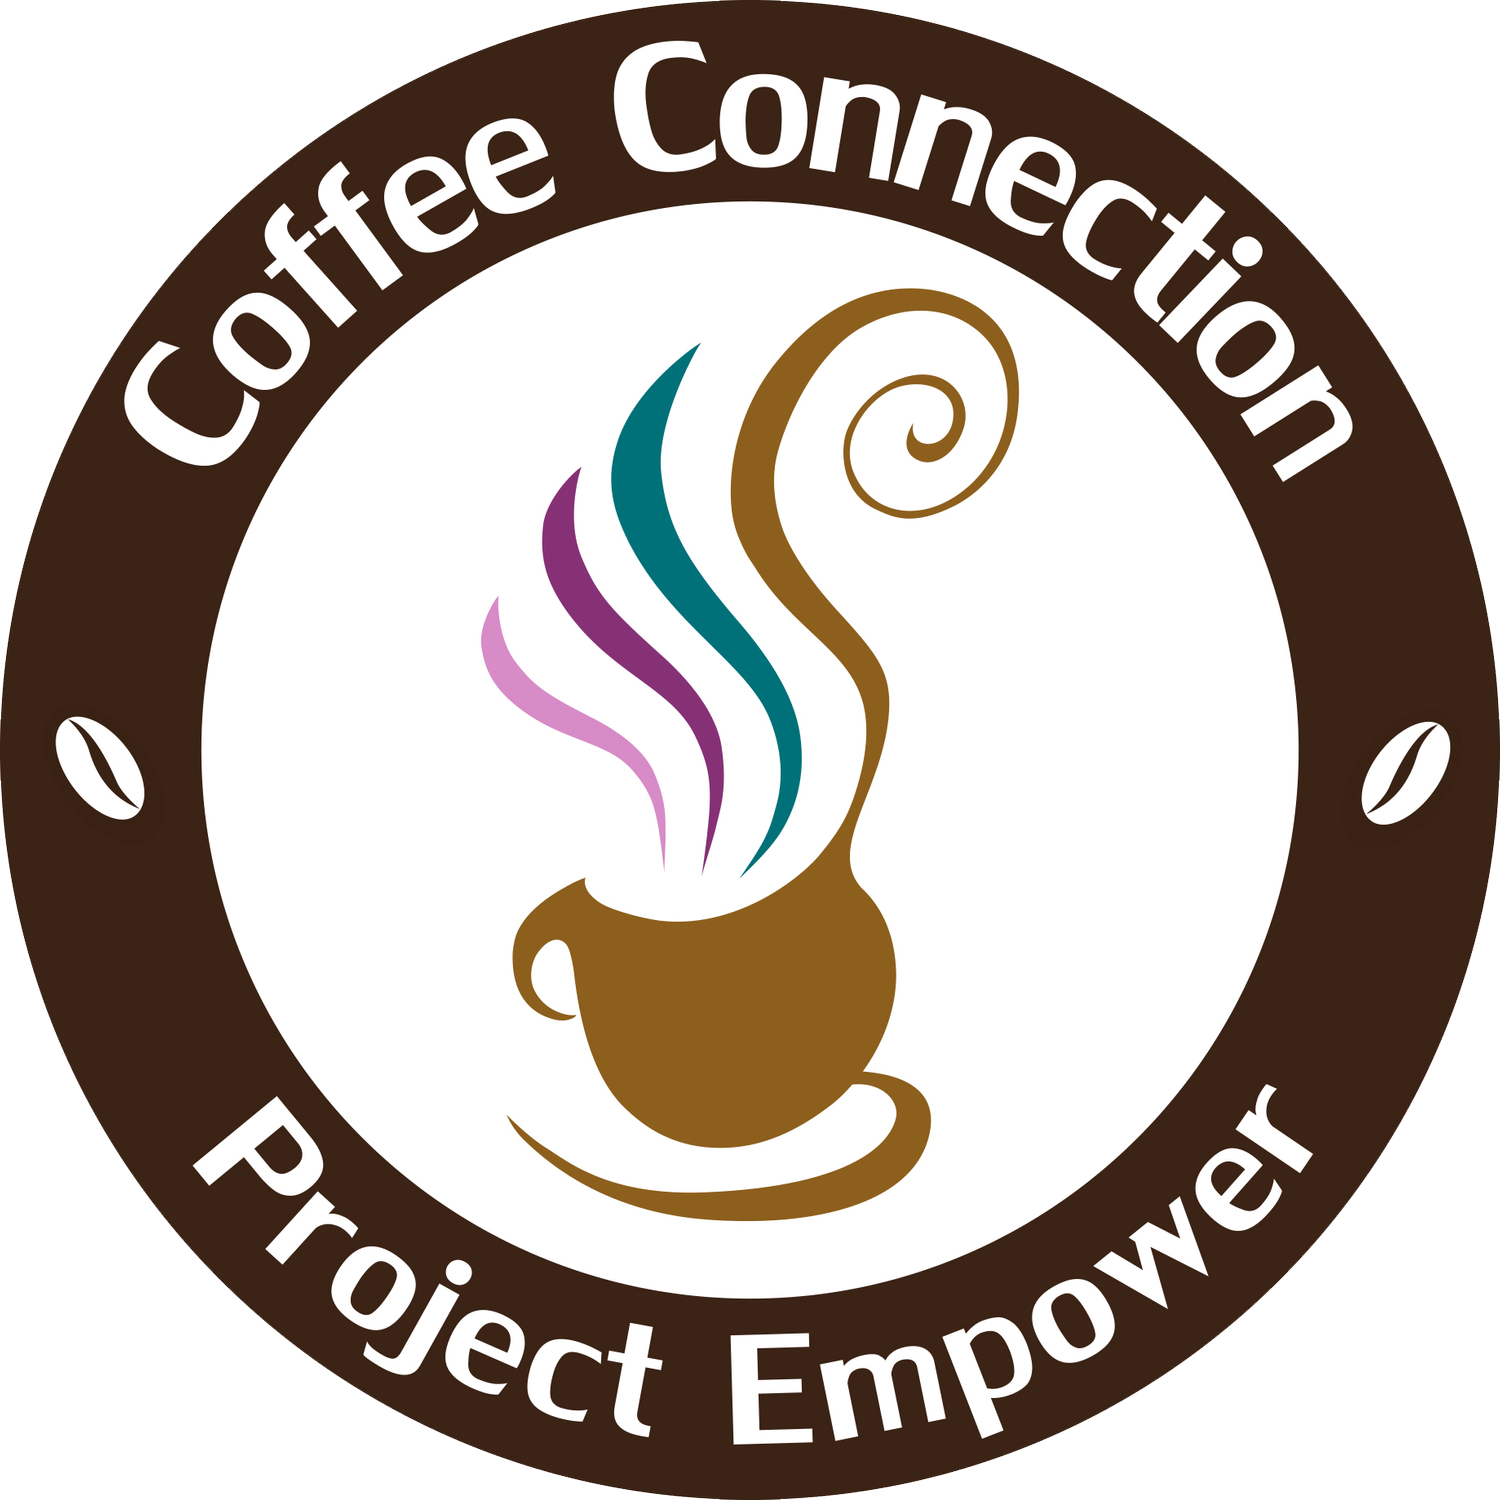 Coffee Connection